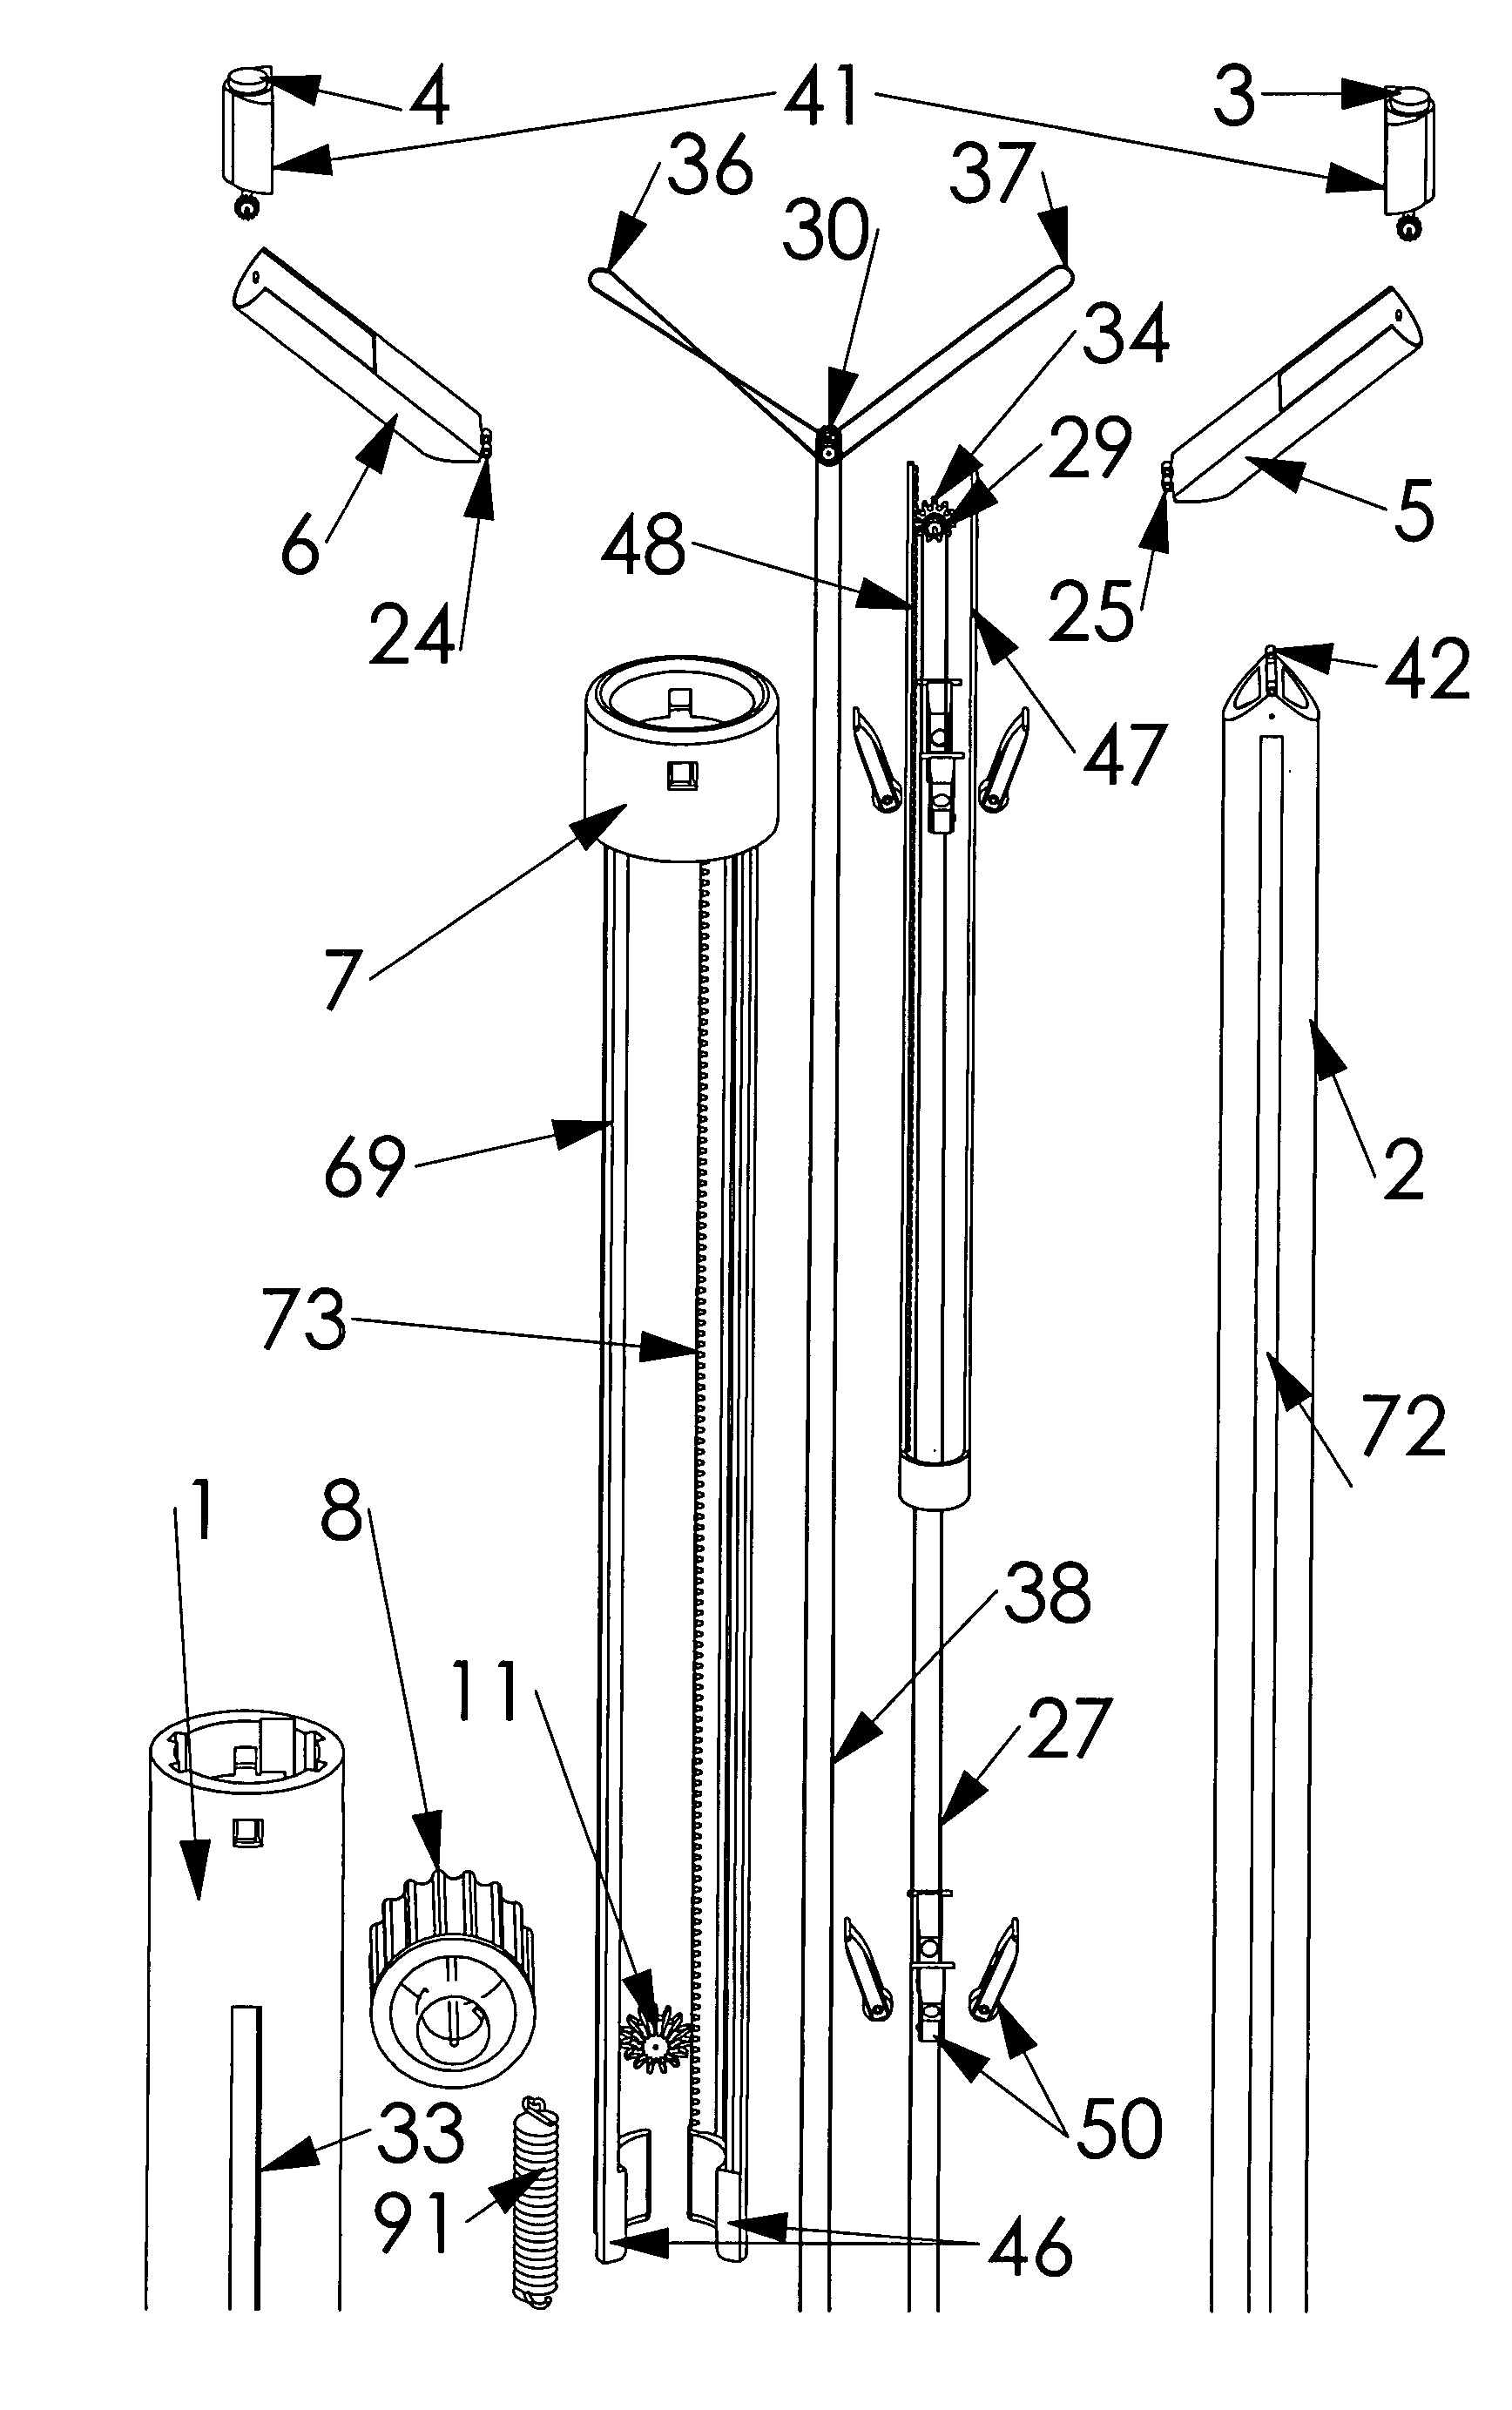 Endoscopic system and method for therapeutic applications and obtaining 3-dimensional human vision simulated imaging with real dynamic convergence